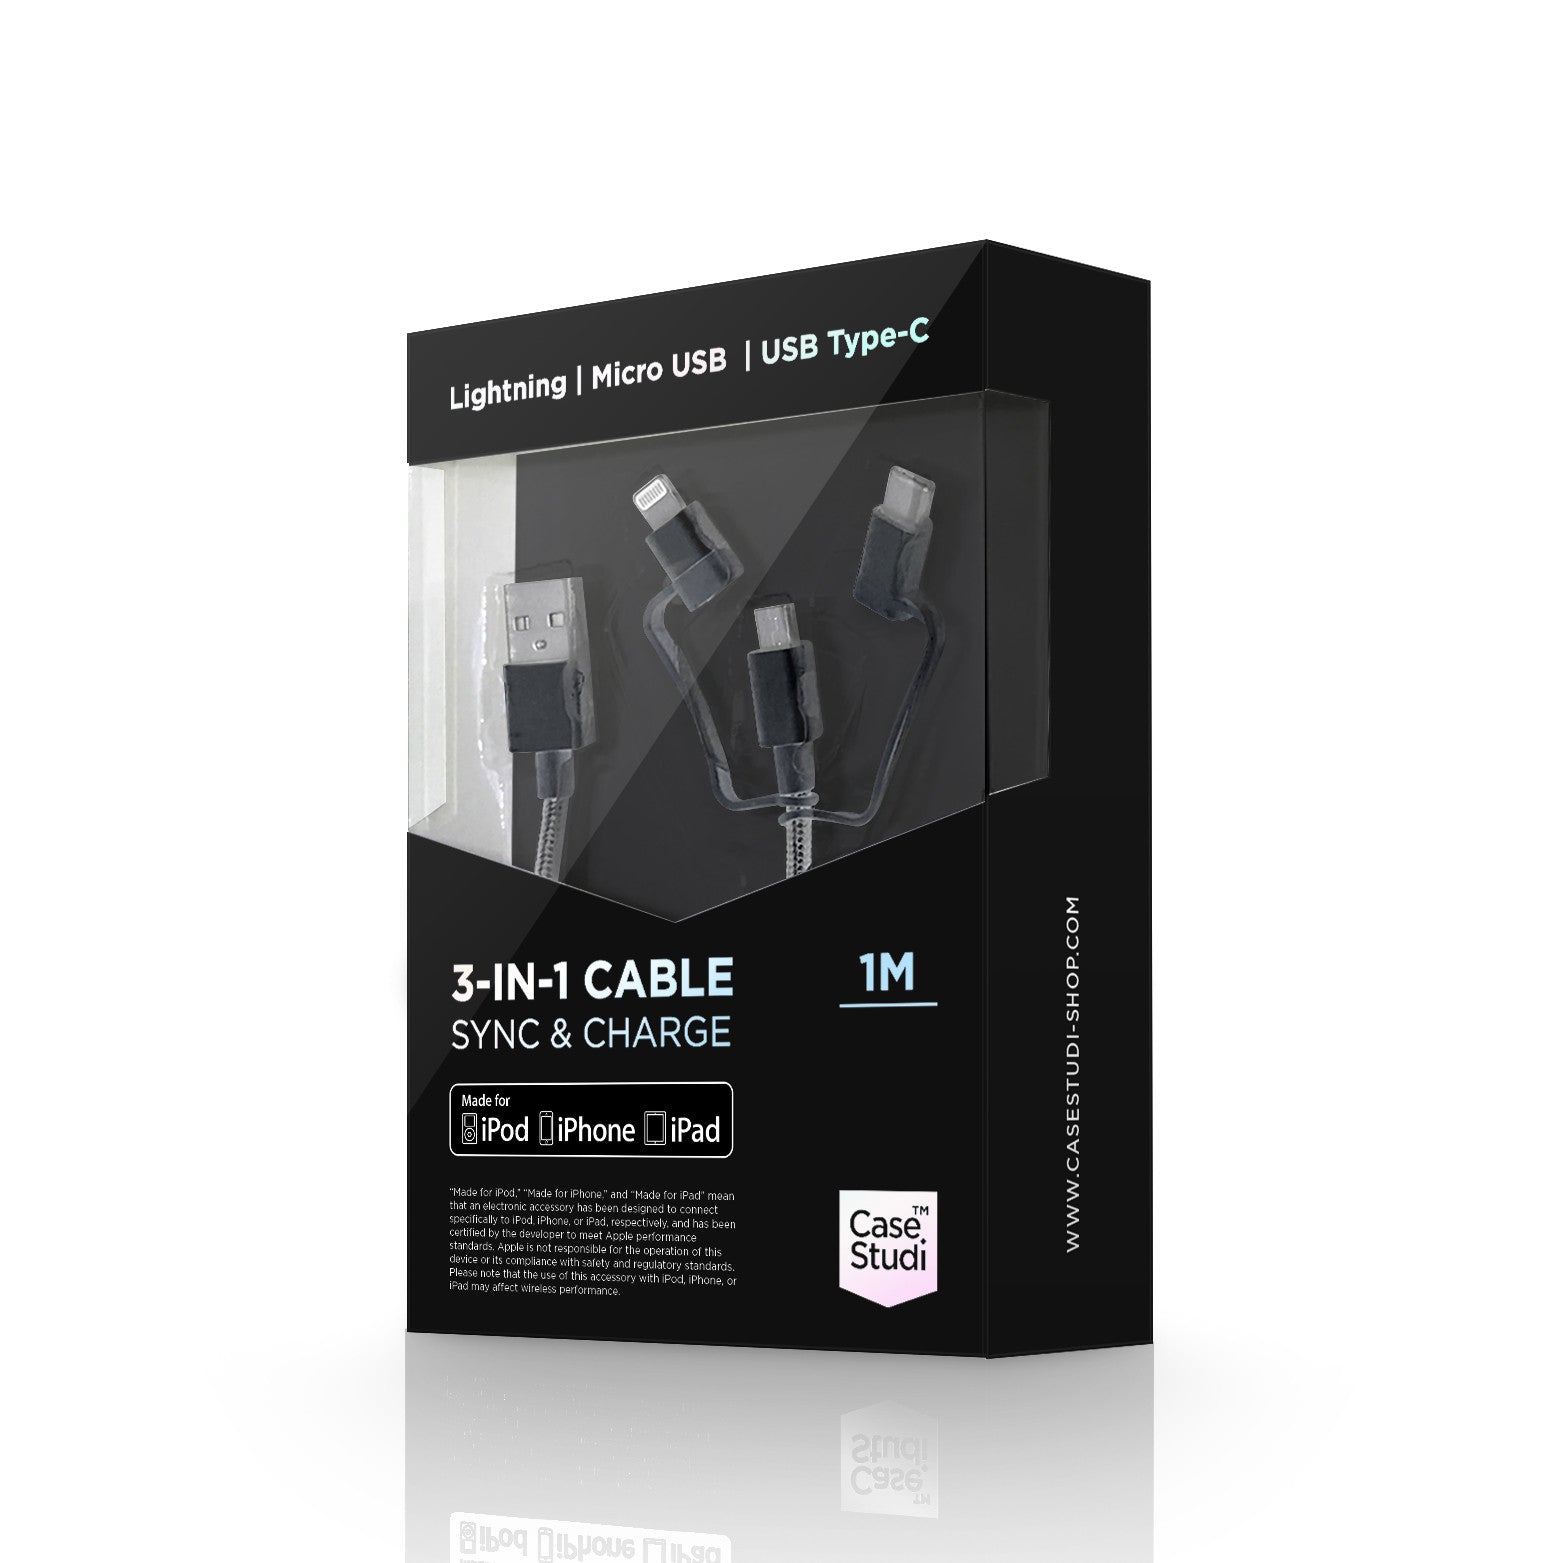 3-in-1 cable (Lightning, Type-C, Micro USB): Black 1M